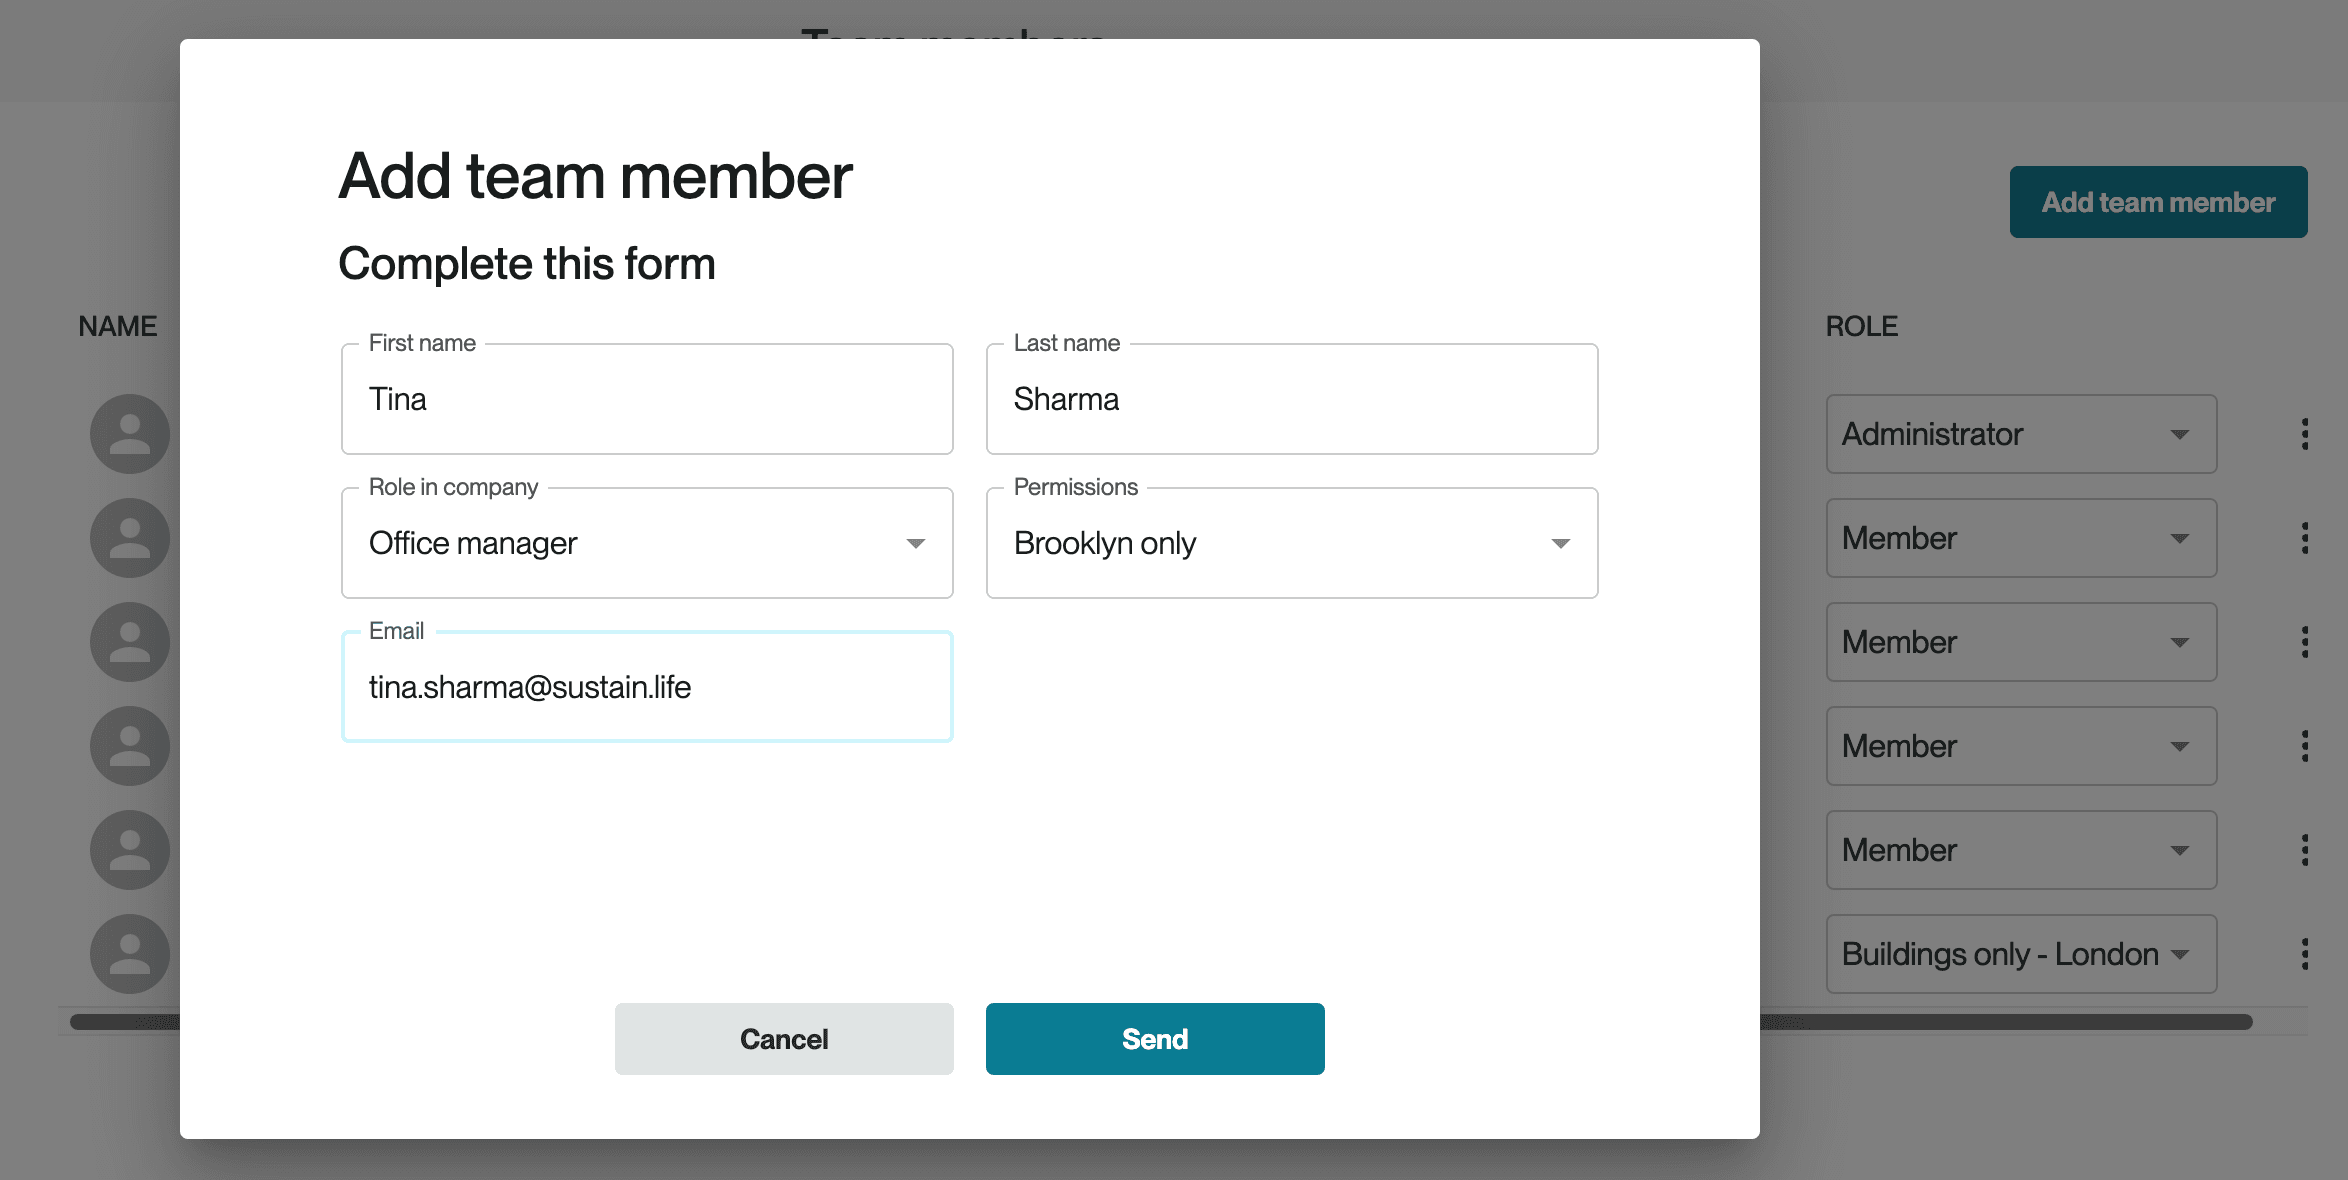 010 User permissions_save new team member.png